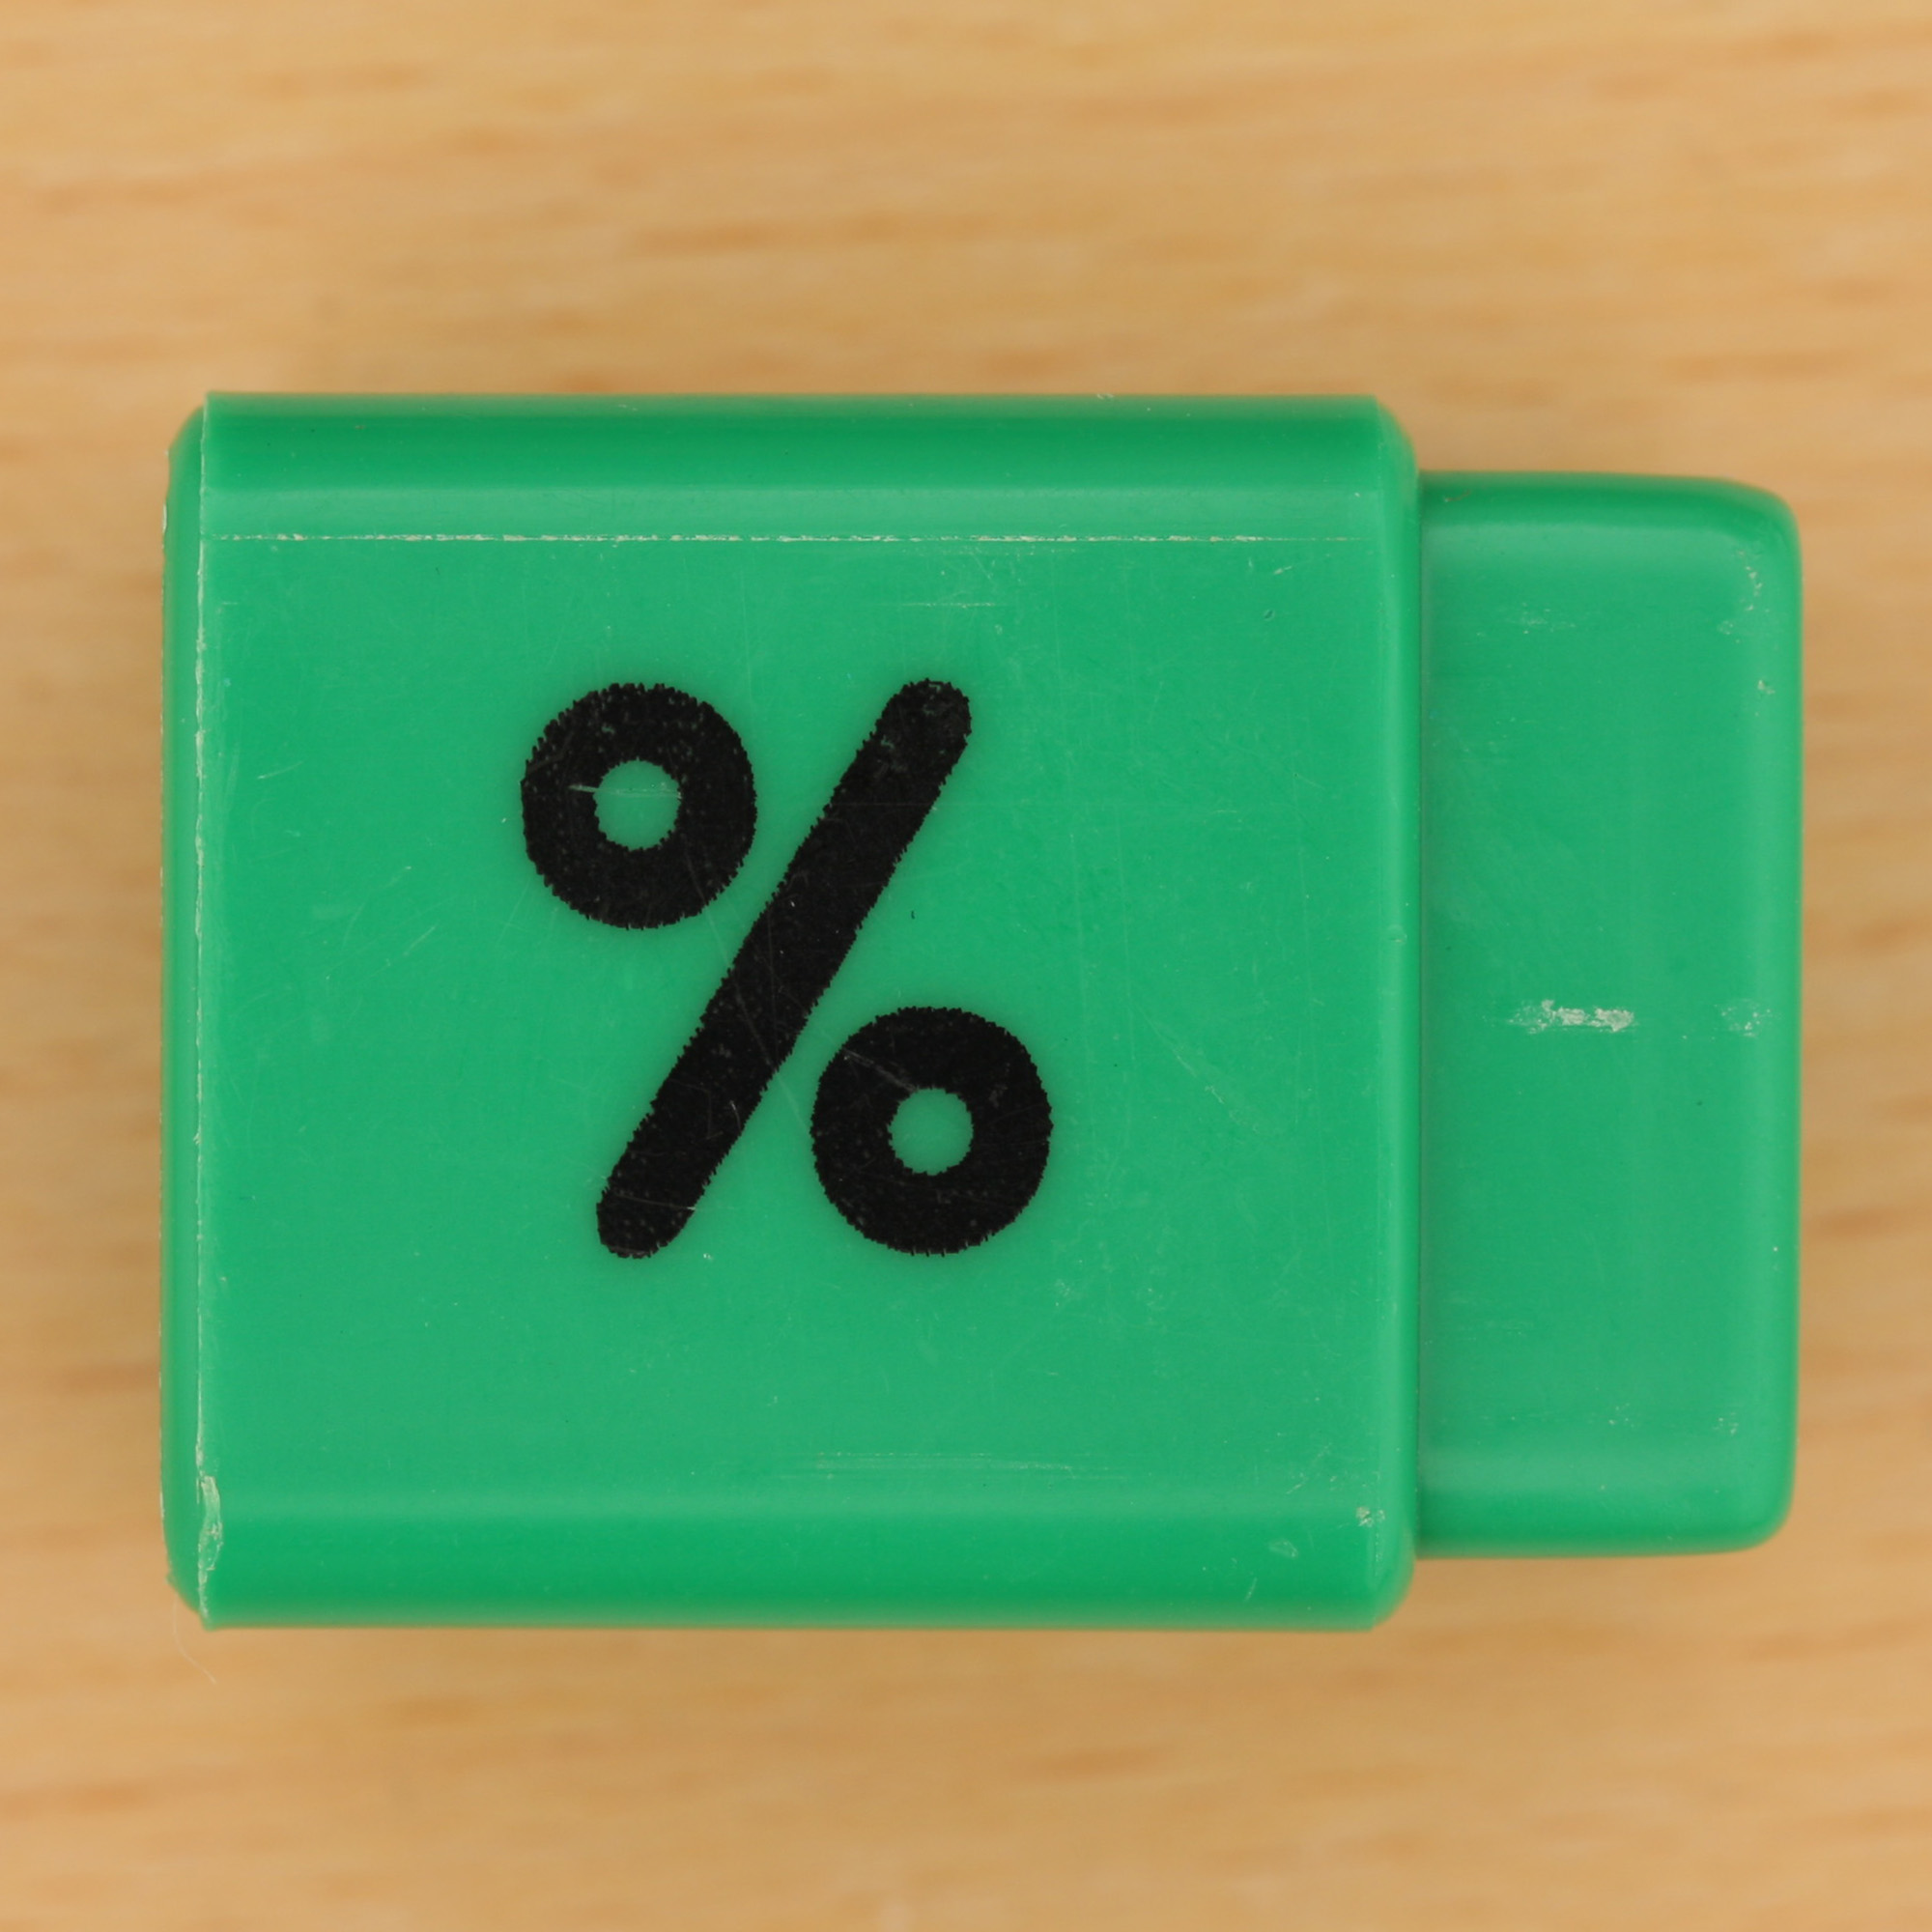 Why Percentages Matter—And Why We Should Ignore Them